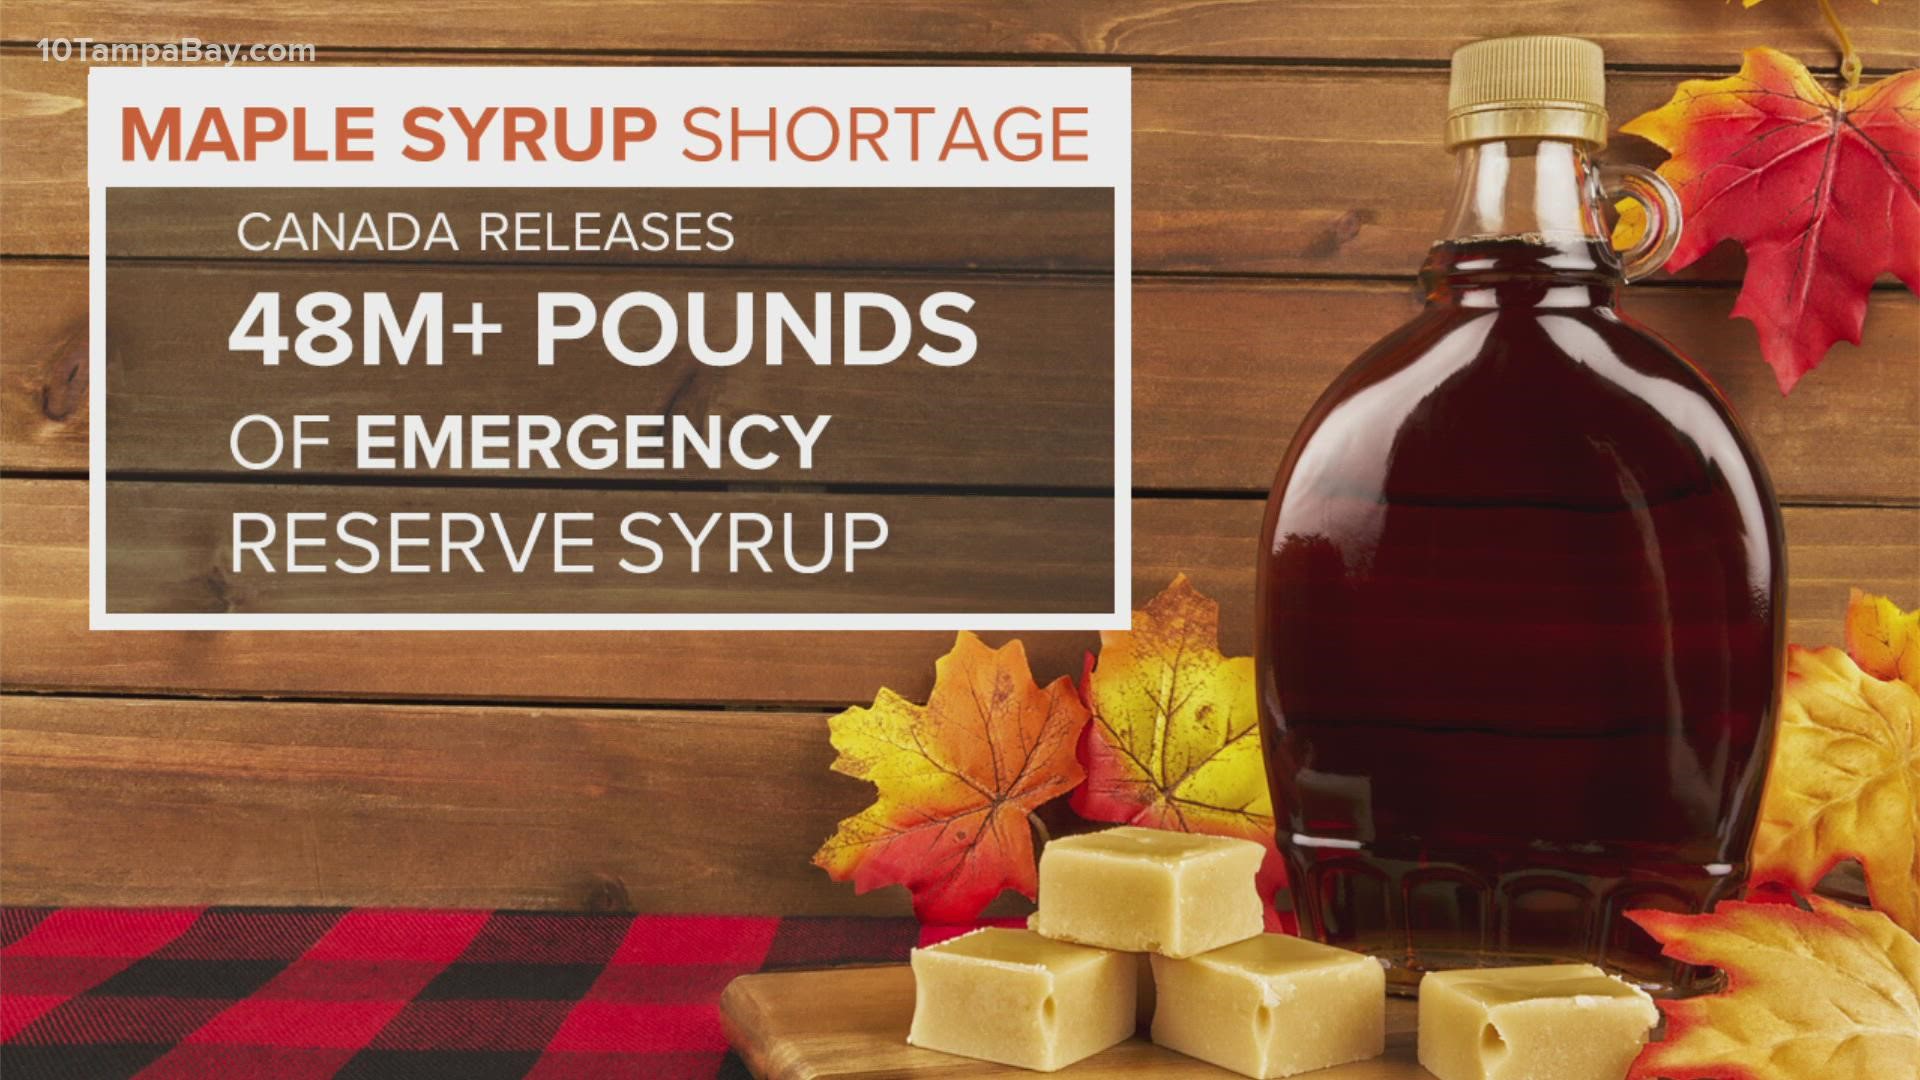 The millions of pounds of syrup that is in the reserve come from years of surplus, when production of maple syrup exceeds demand.